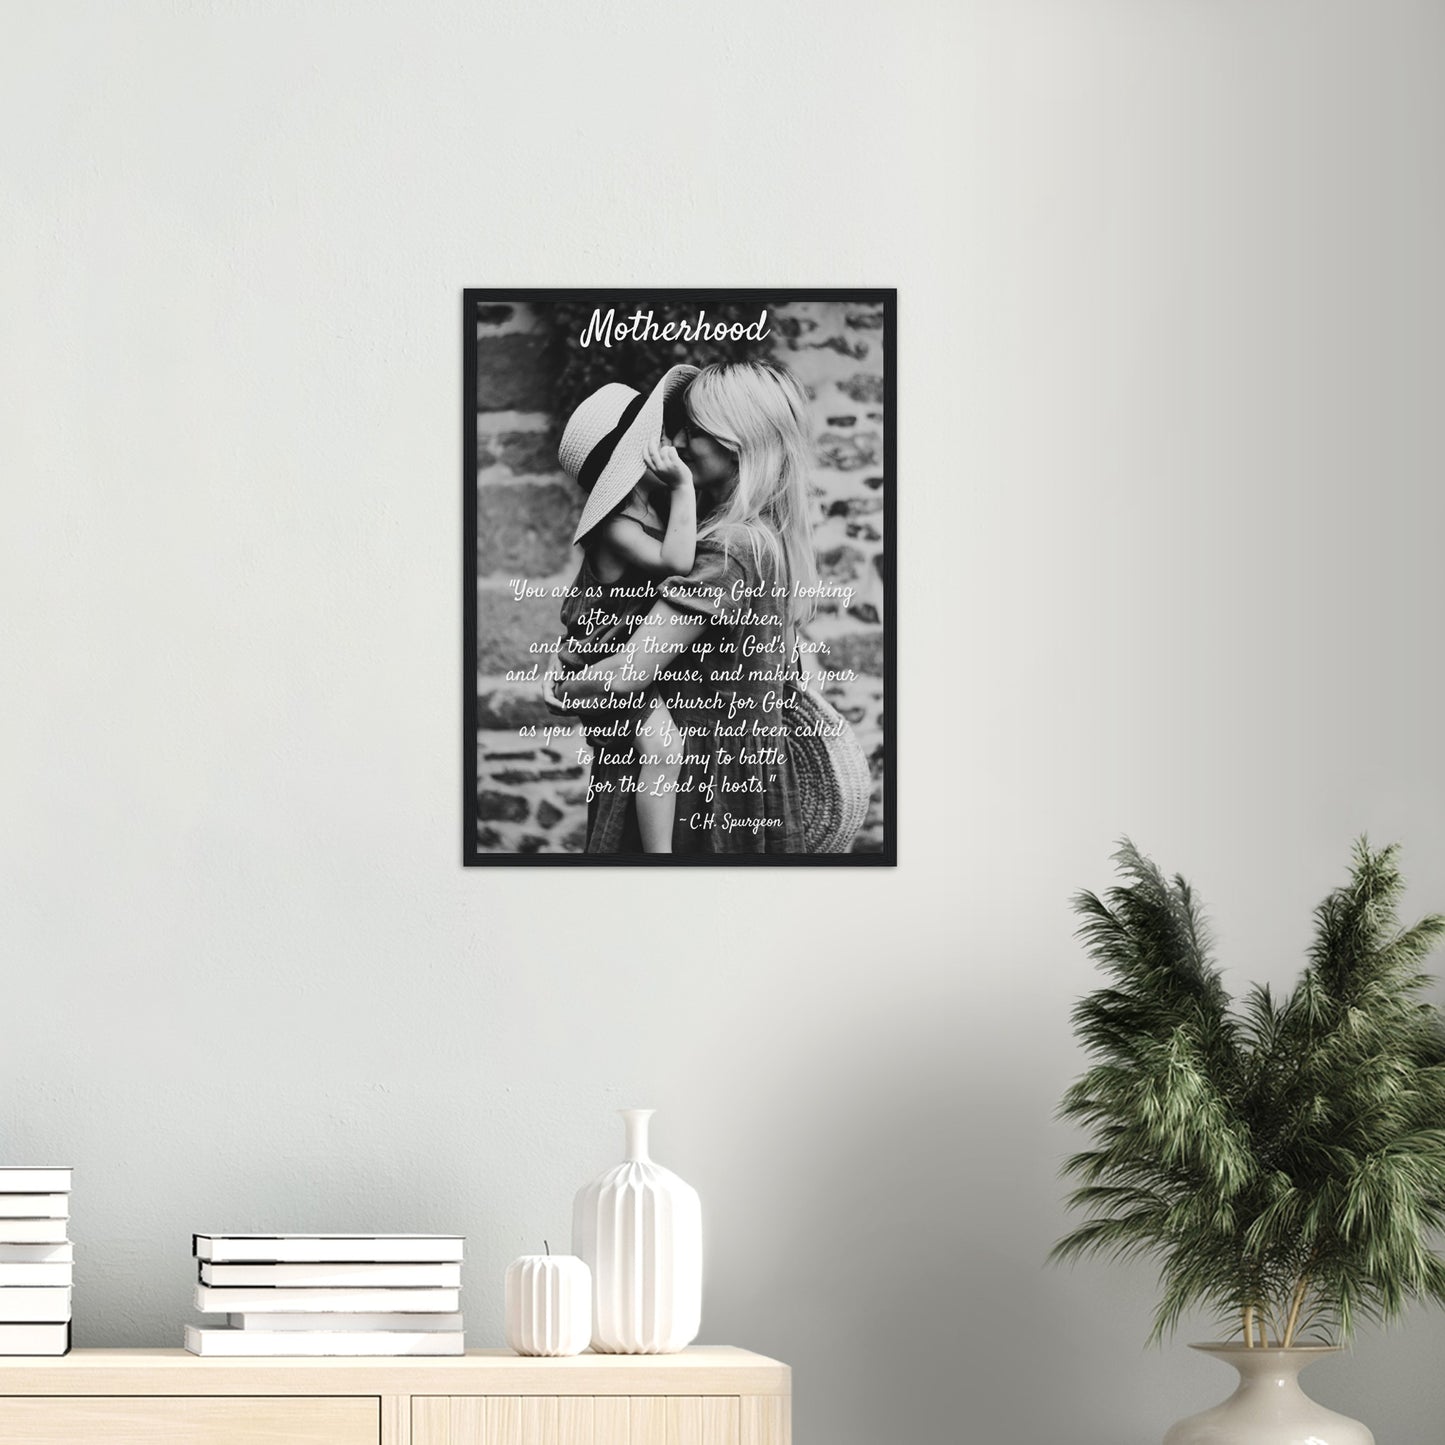 Motherhood Poster in Black & White | Quote by C.H. Spurgeon Poster | Christian Wall Art for Mom